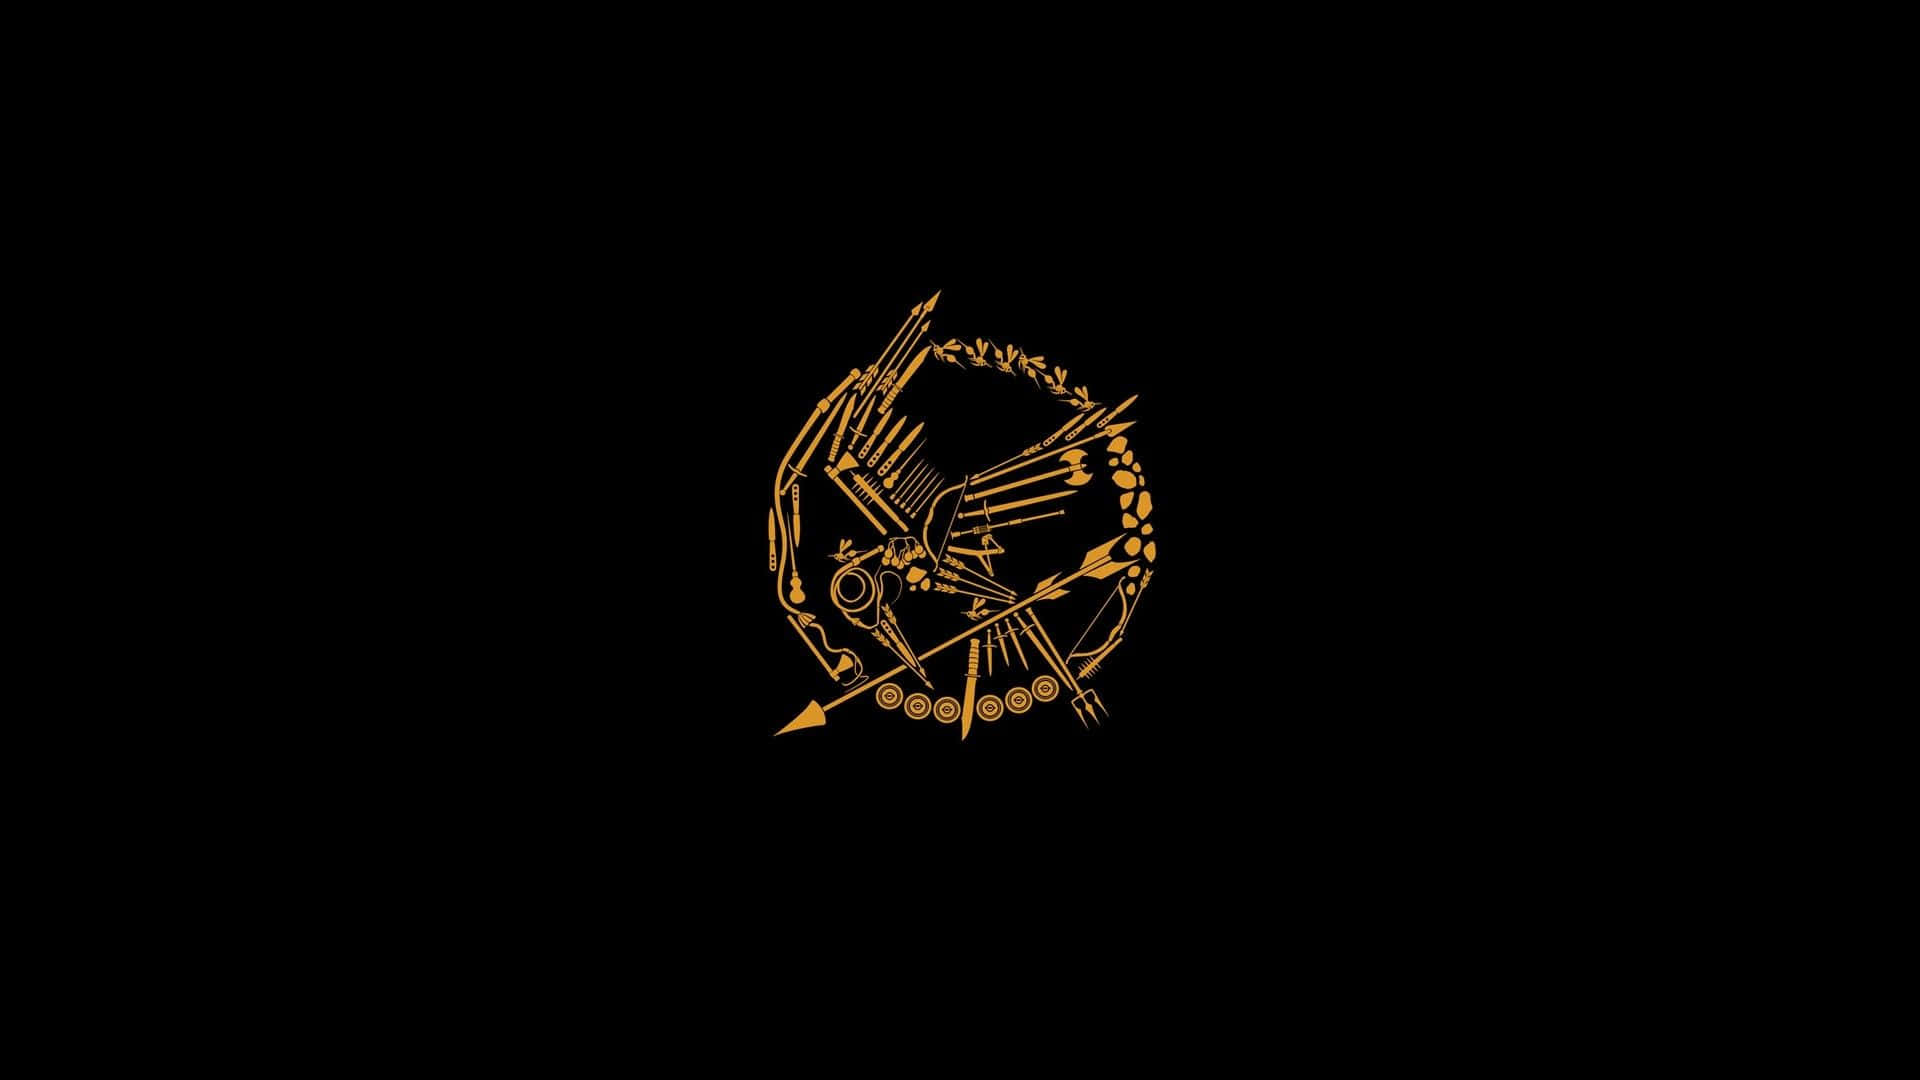 The Hunger Games Logo On A Black Background